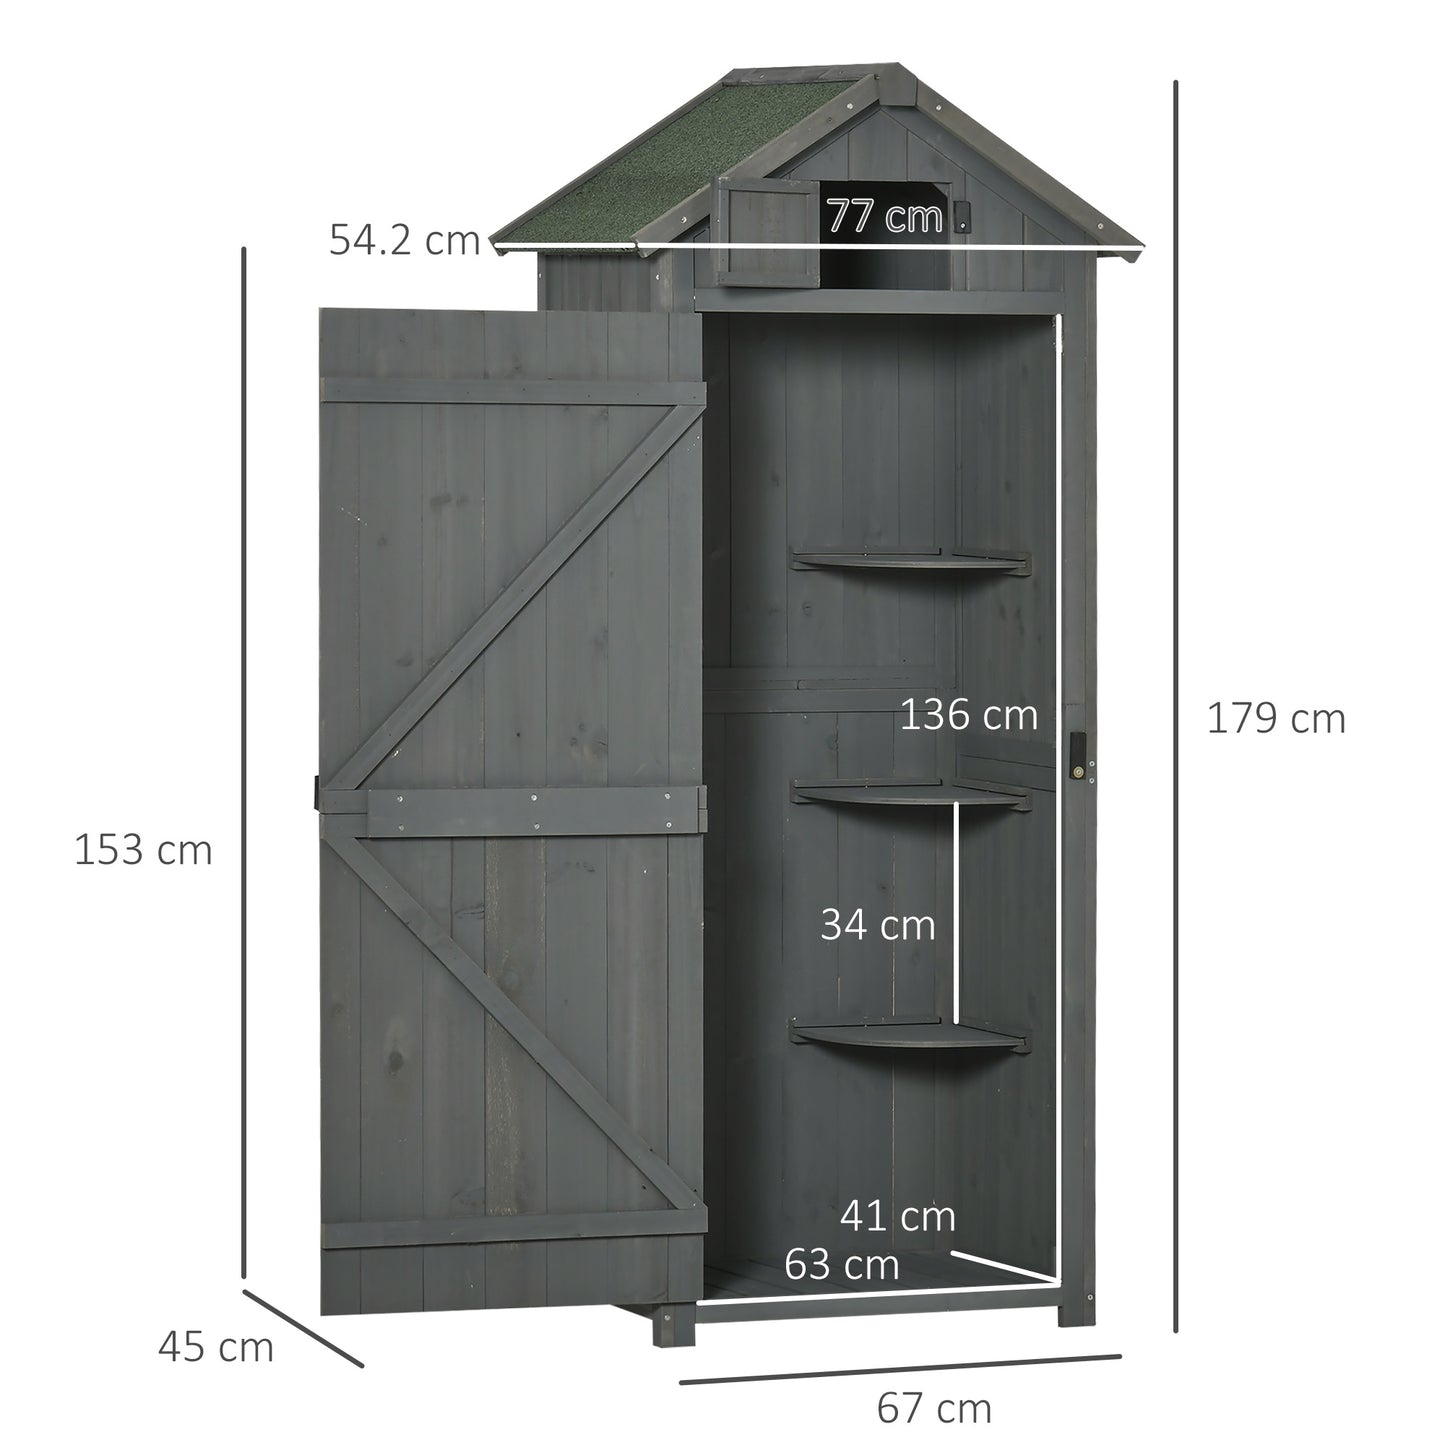 Outsunny Garden Shed Vertical Utility 3 Shelves Shed Wood Outdoor Garden Tool Storage Unit Storage Cabinet, 77 x 54.2 x 179cm - Grey